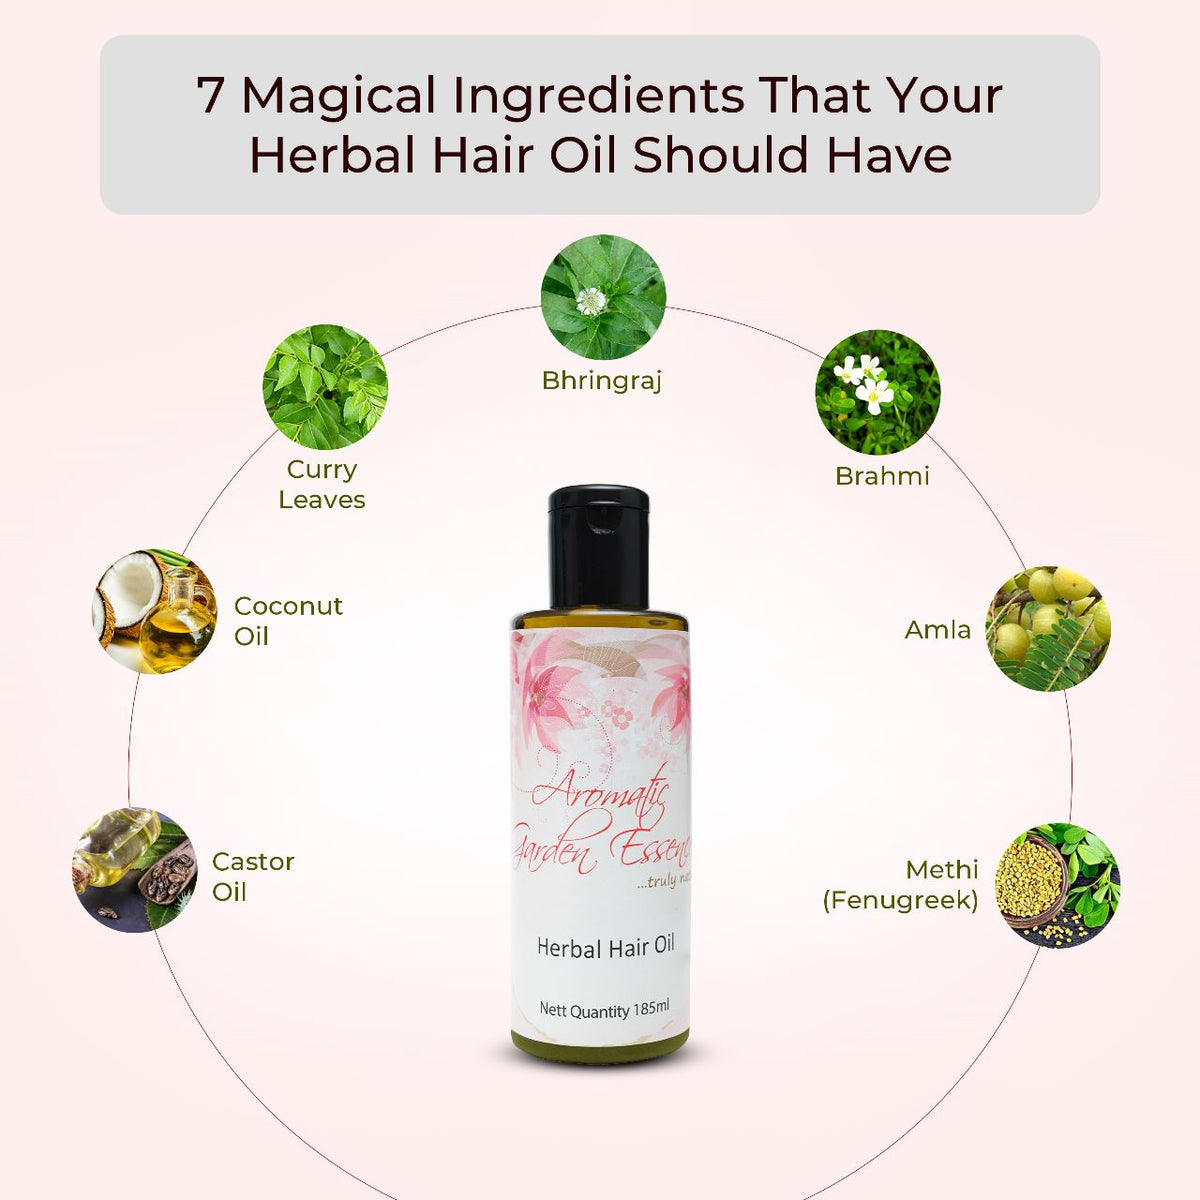 7 Magical Ingredients That Your Herbal Hair Oil Should Have